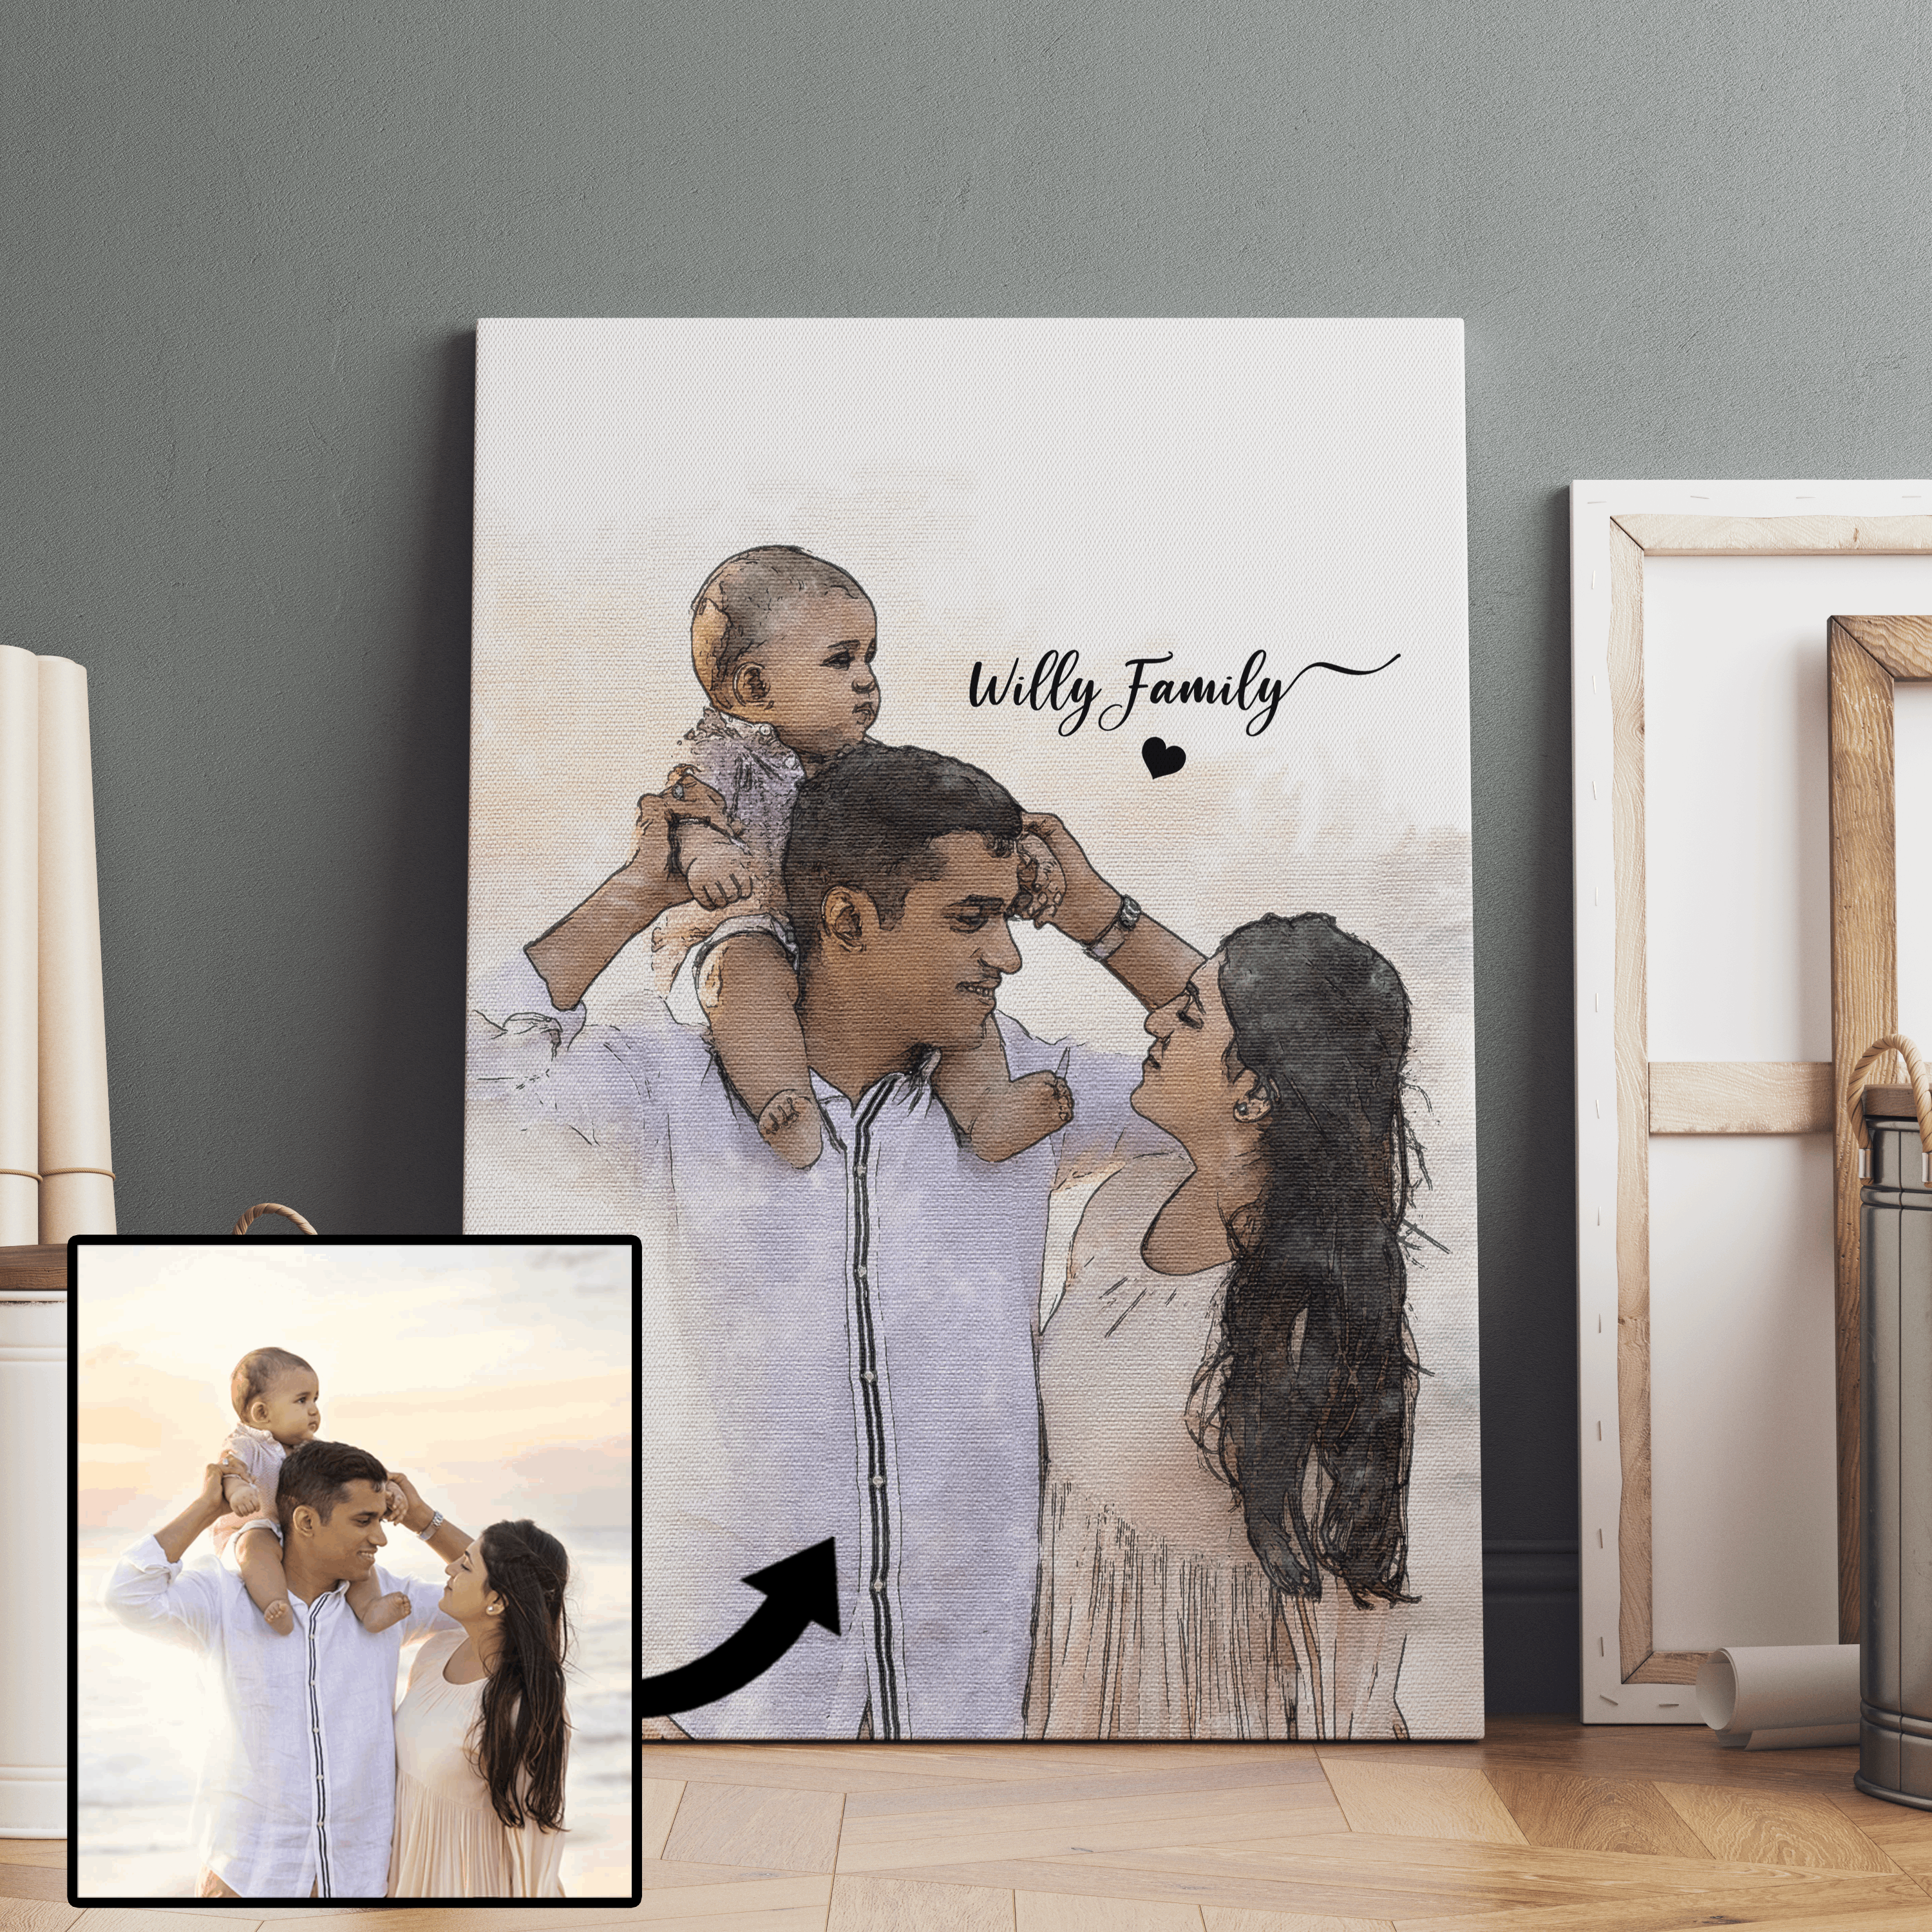 Personalised Couple Painting From Photo, Custom Couple Portrait